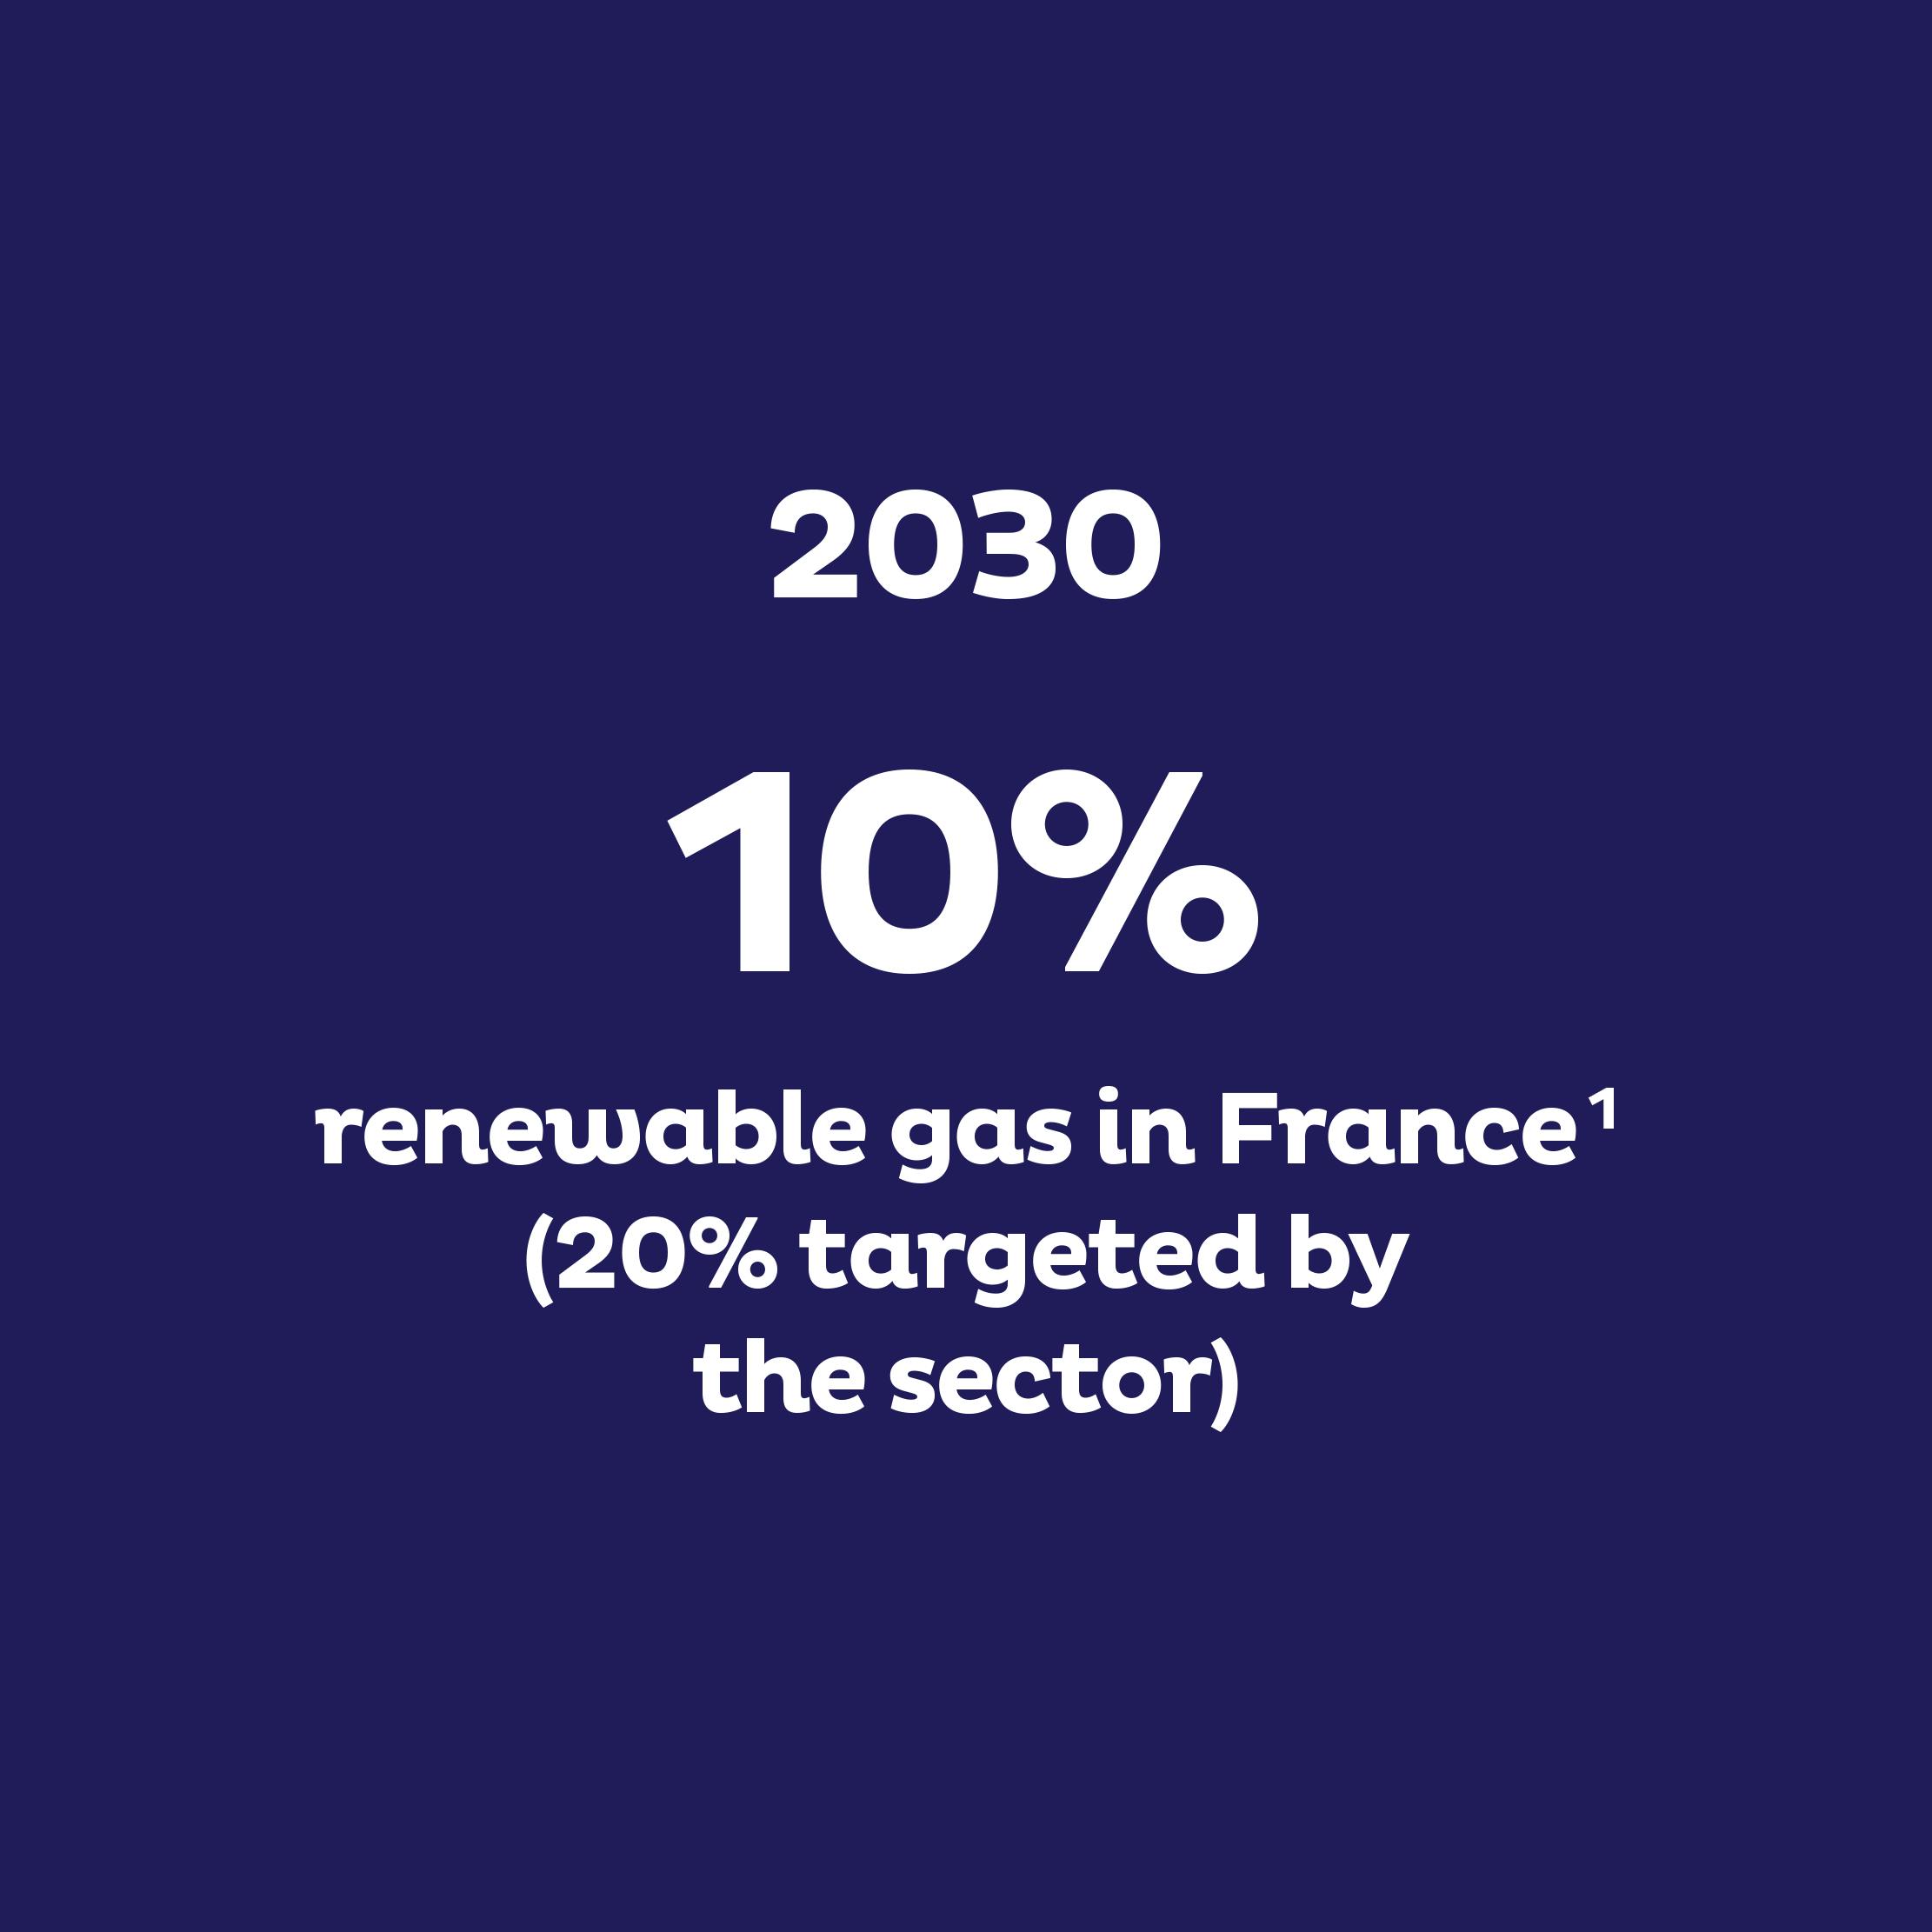 2030 : 10% renewable gas in France1 (20% targeted by the sector)